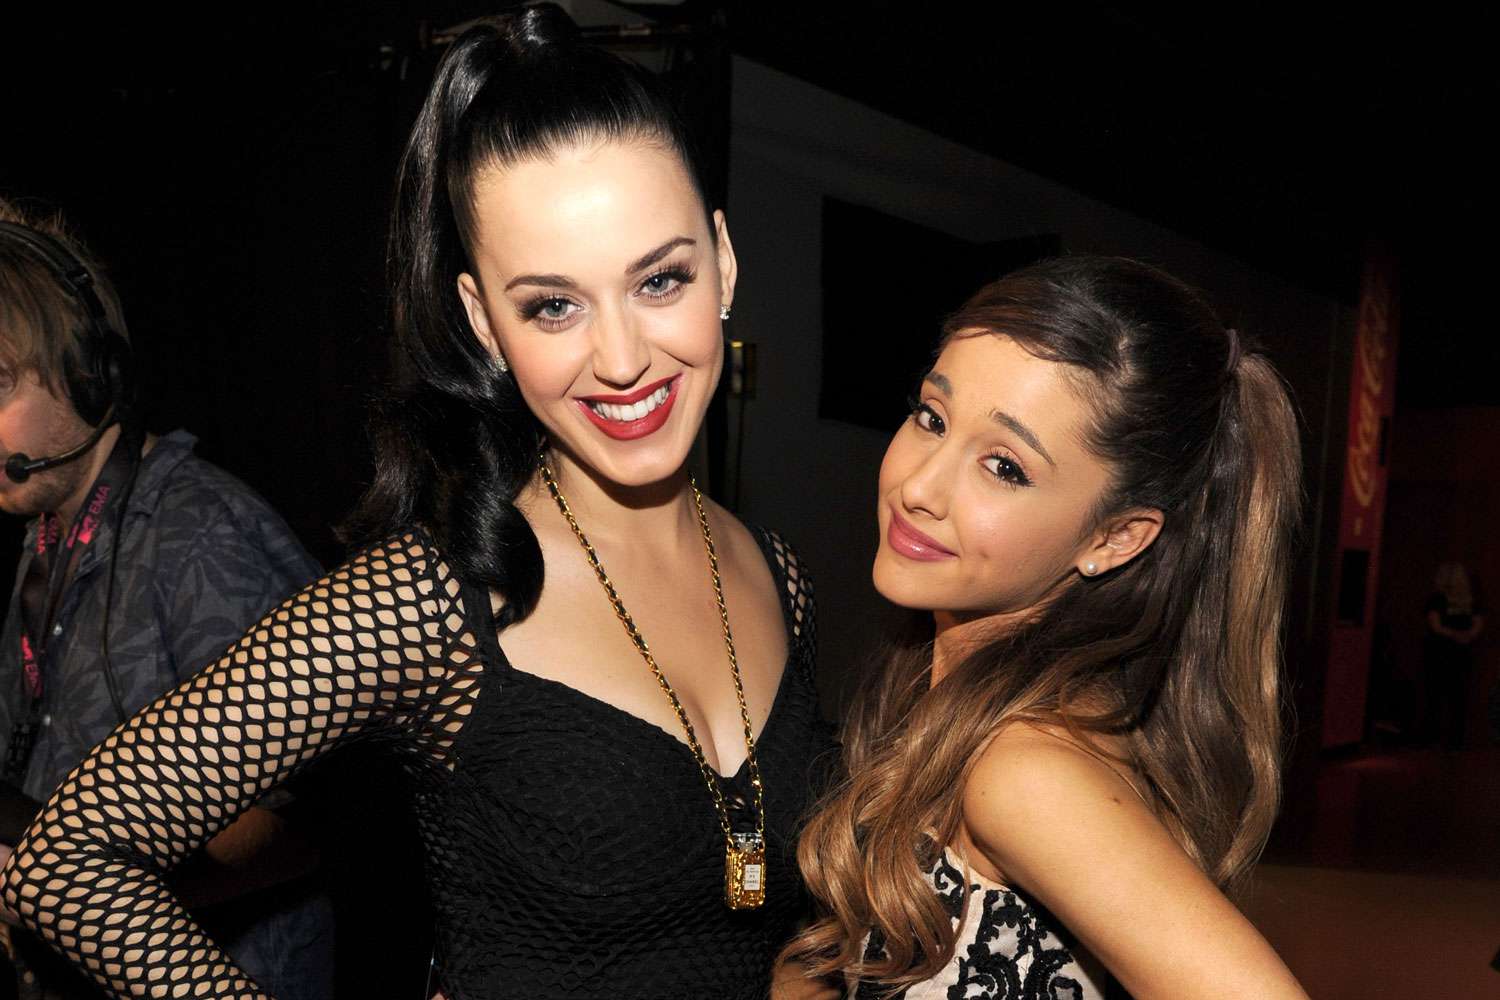 Katy Perry Calls Ariana Grande the 'Best Singer of Our Generation': 'I Don't Say That Lightly'